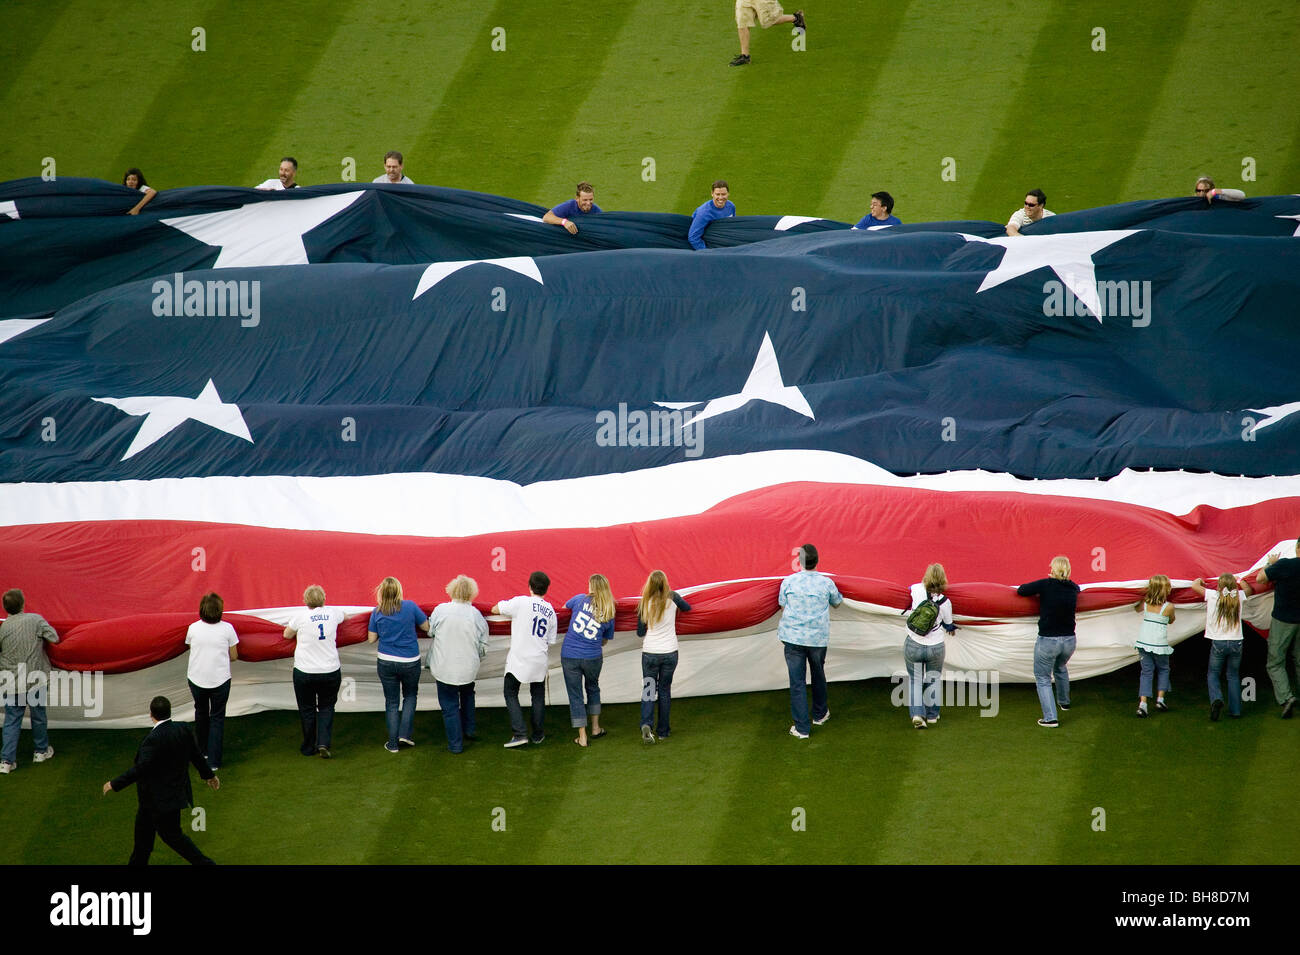 Unfurling of gigantic American Flag during opening ceremony of National League Championship Series (NLCS), Dodger Stadium, Los A Stock Photo